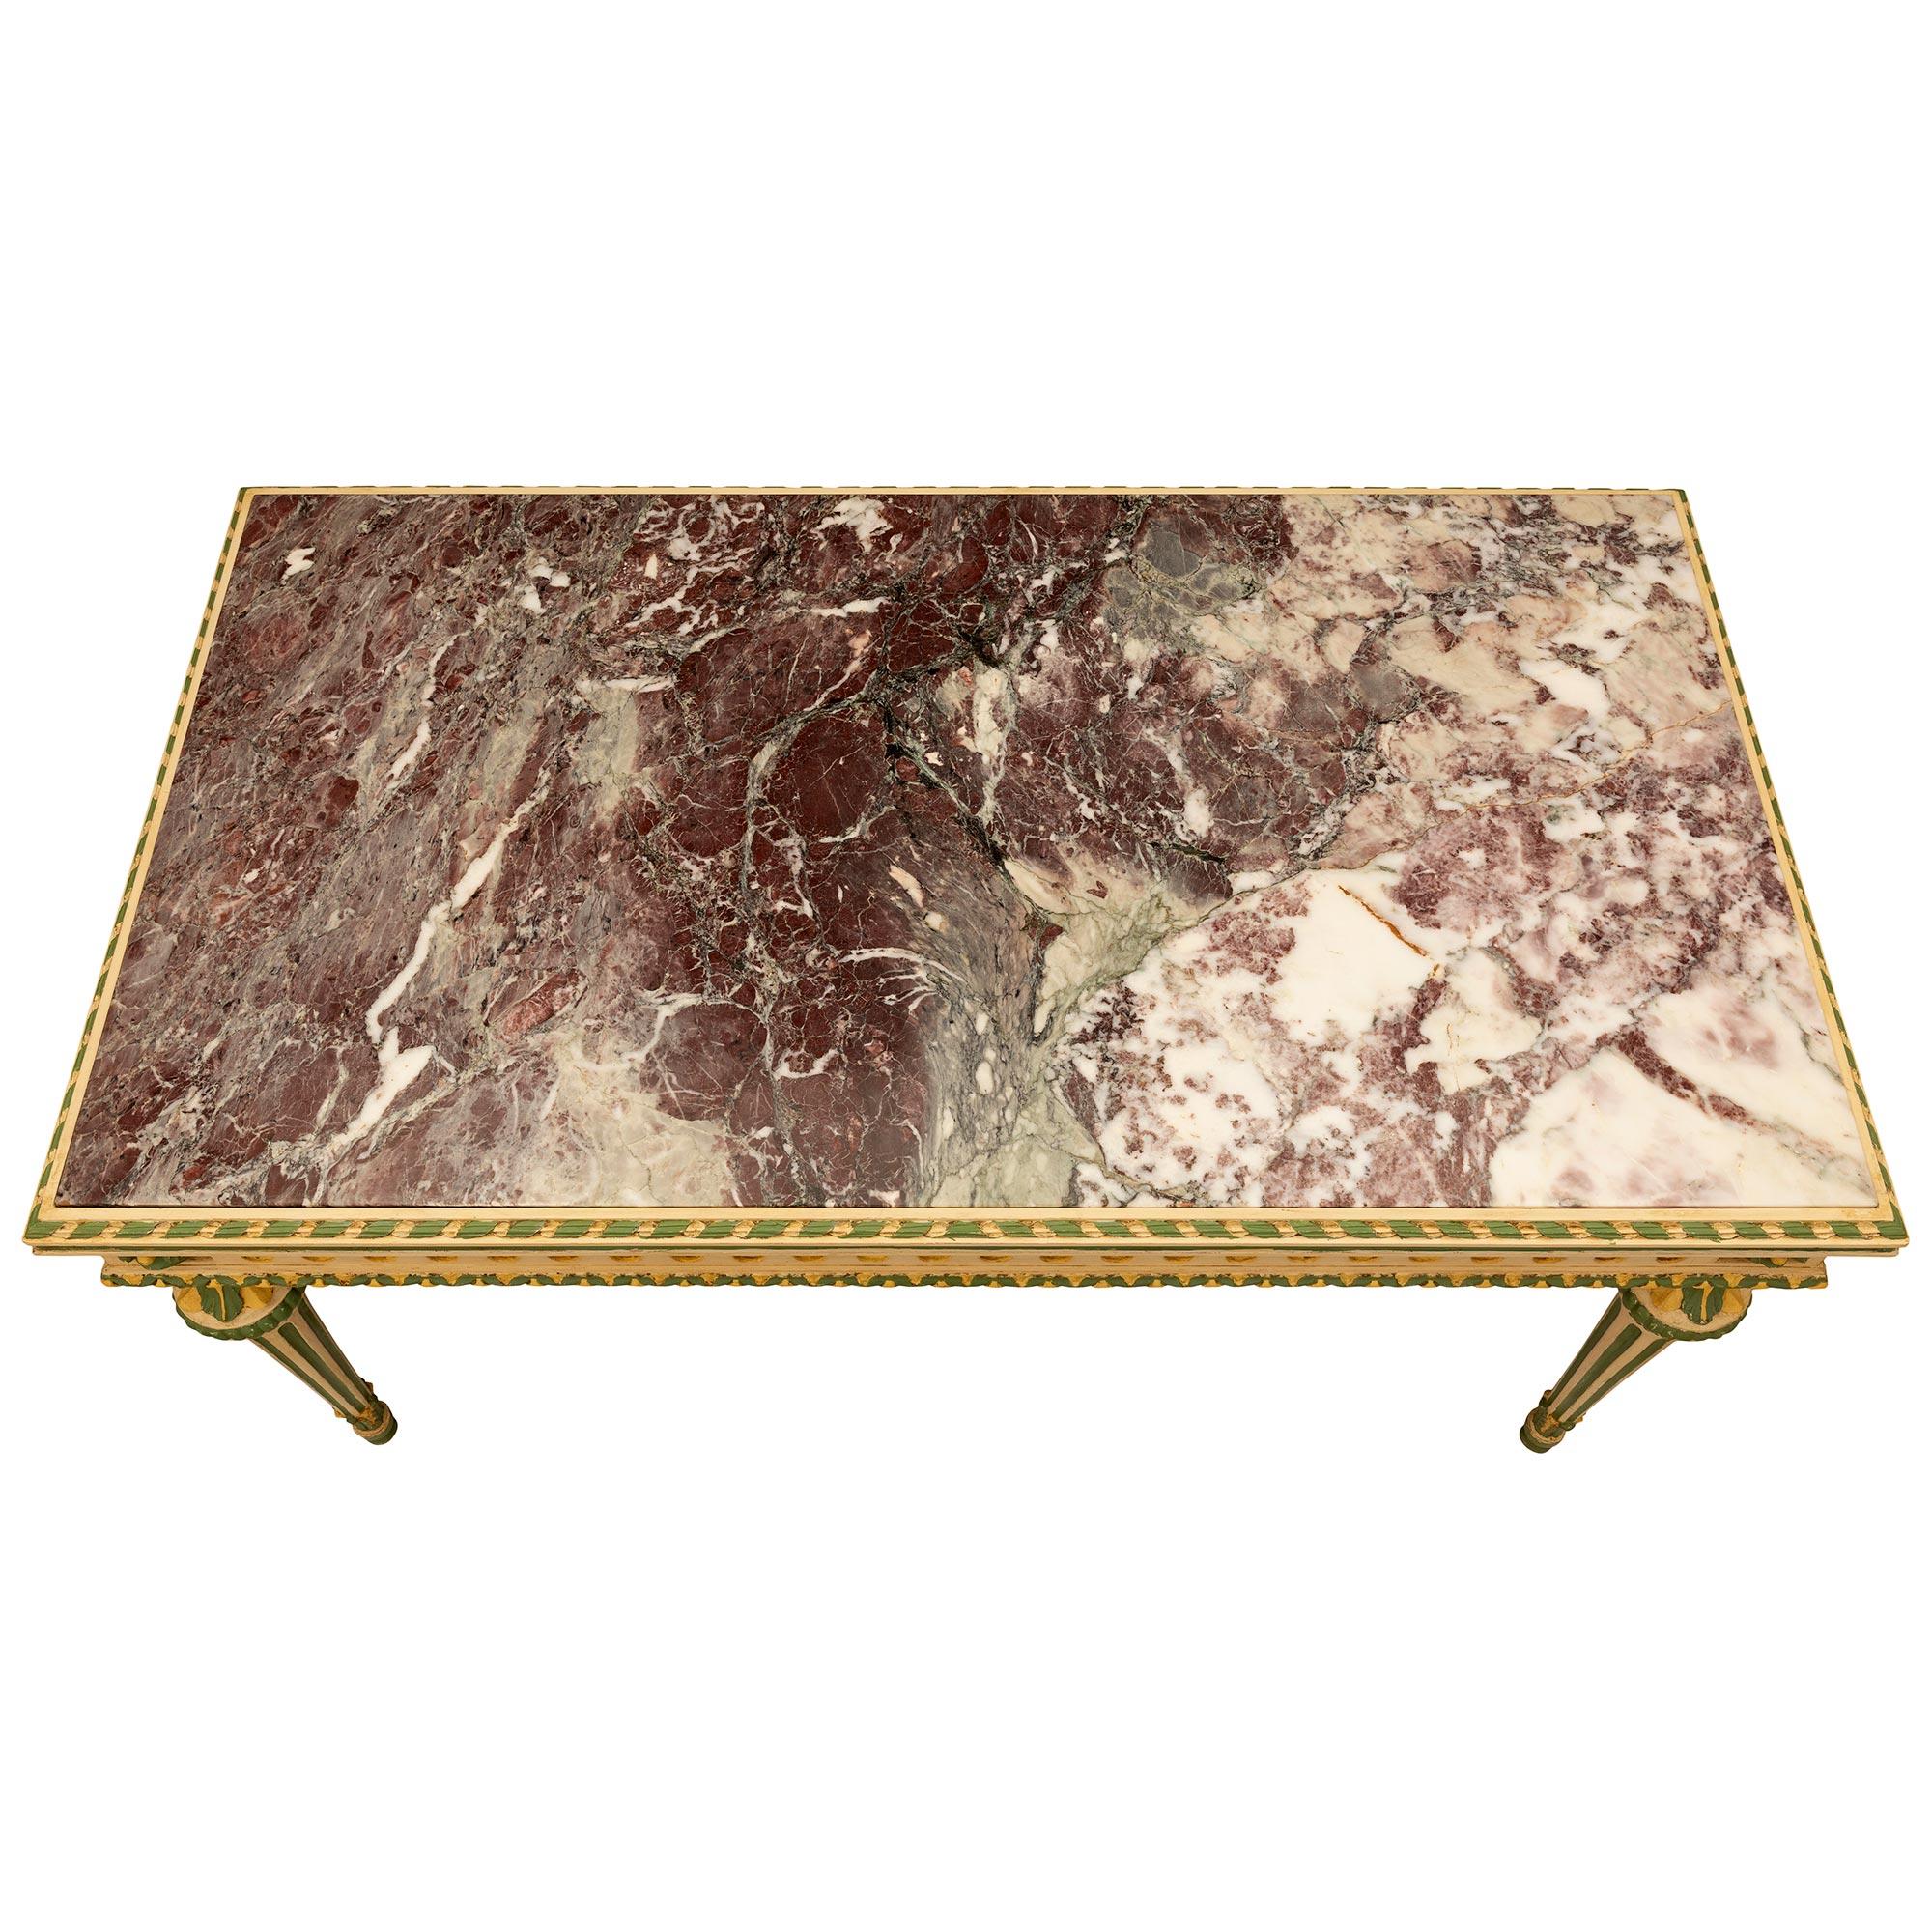 A beautiful and very unique Italian 19th century Louis XVI st. patinated wood and Brèche Violette marble center table. The rectangular table is raised by elegant circular tapered fluted legs with fine topie shaped feet with lovely acanthus leaf